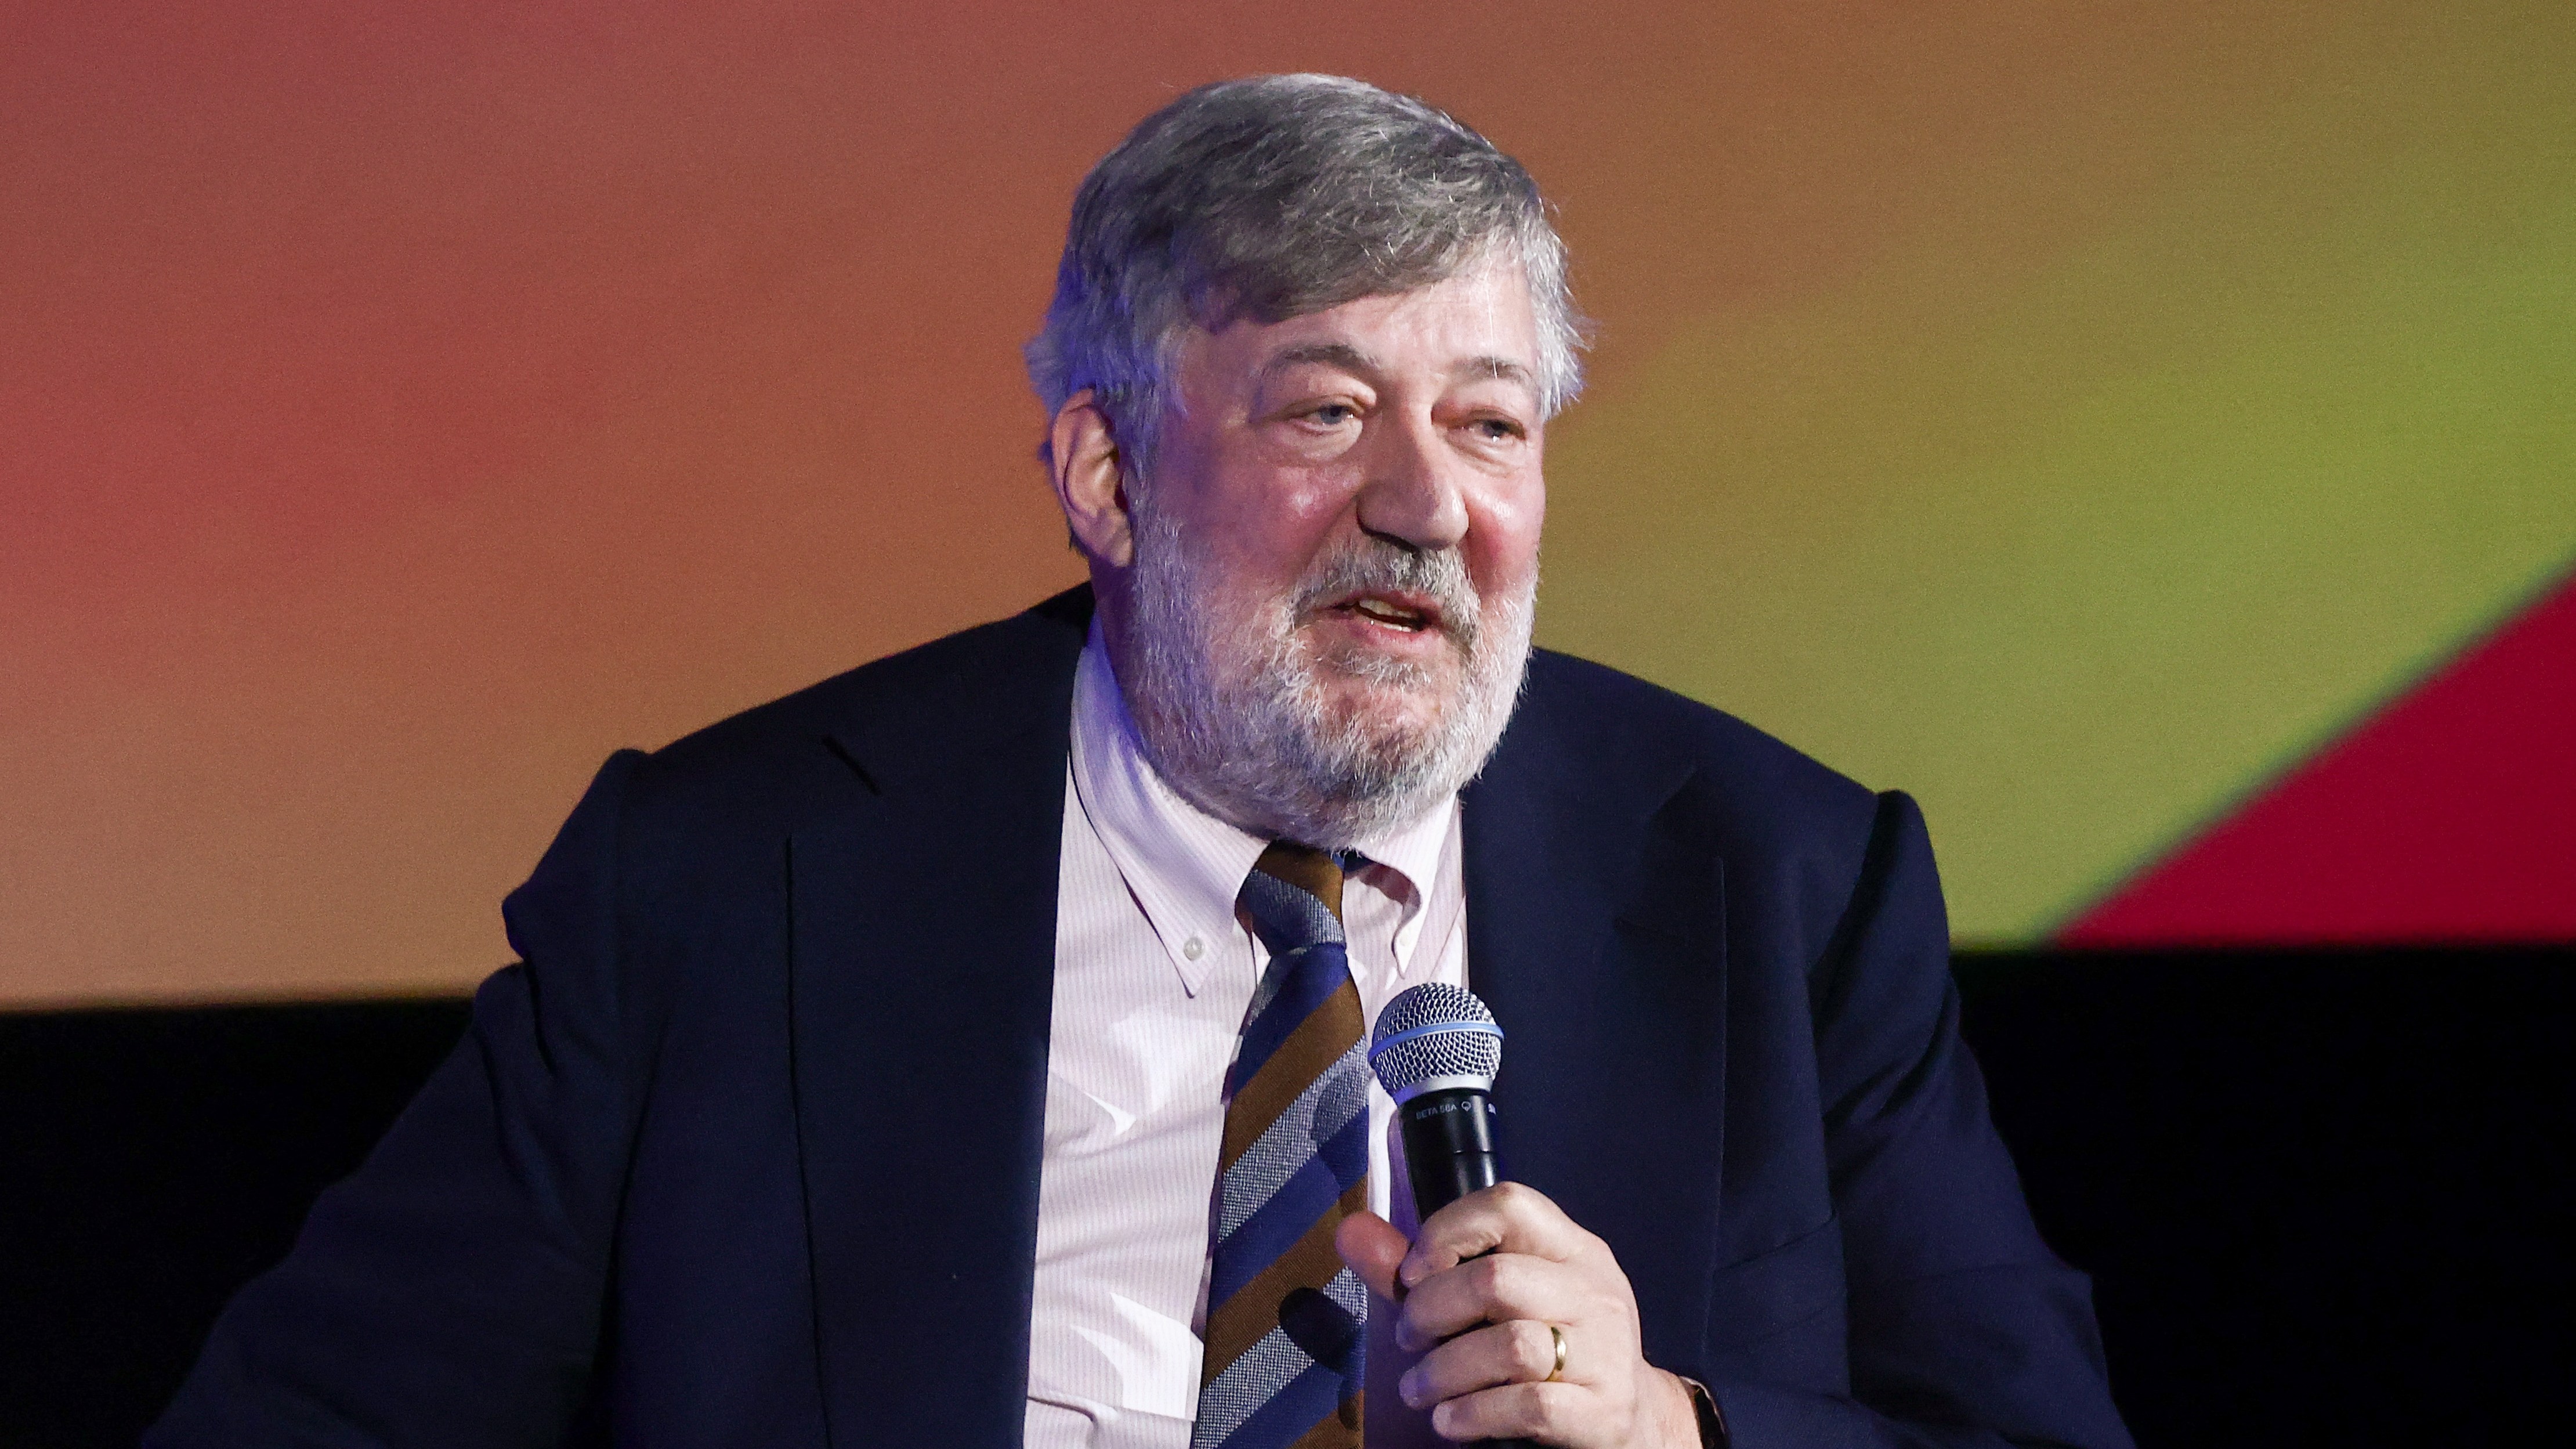 Members of the MCC have called for Stephen Fry’s suspension